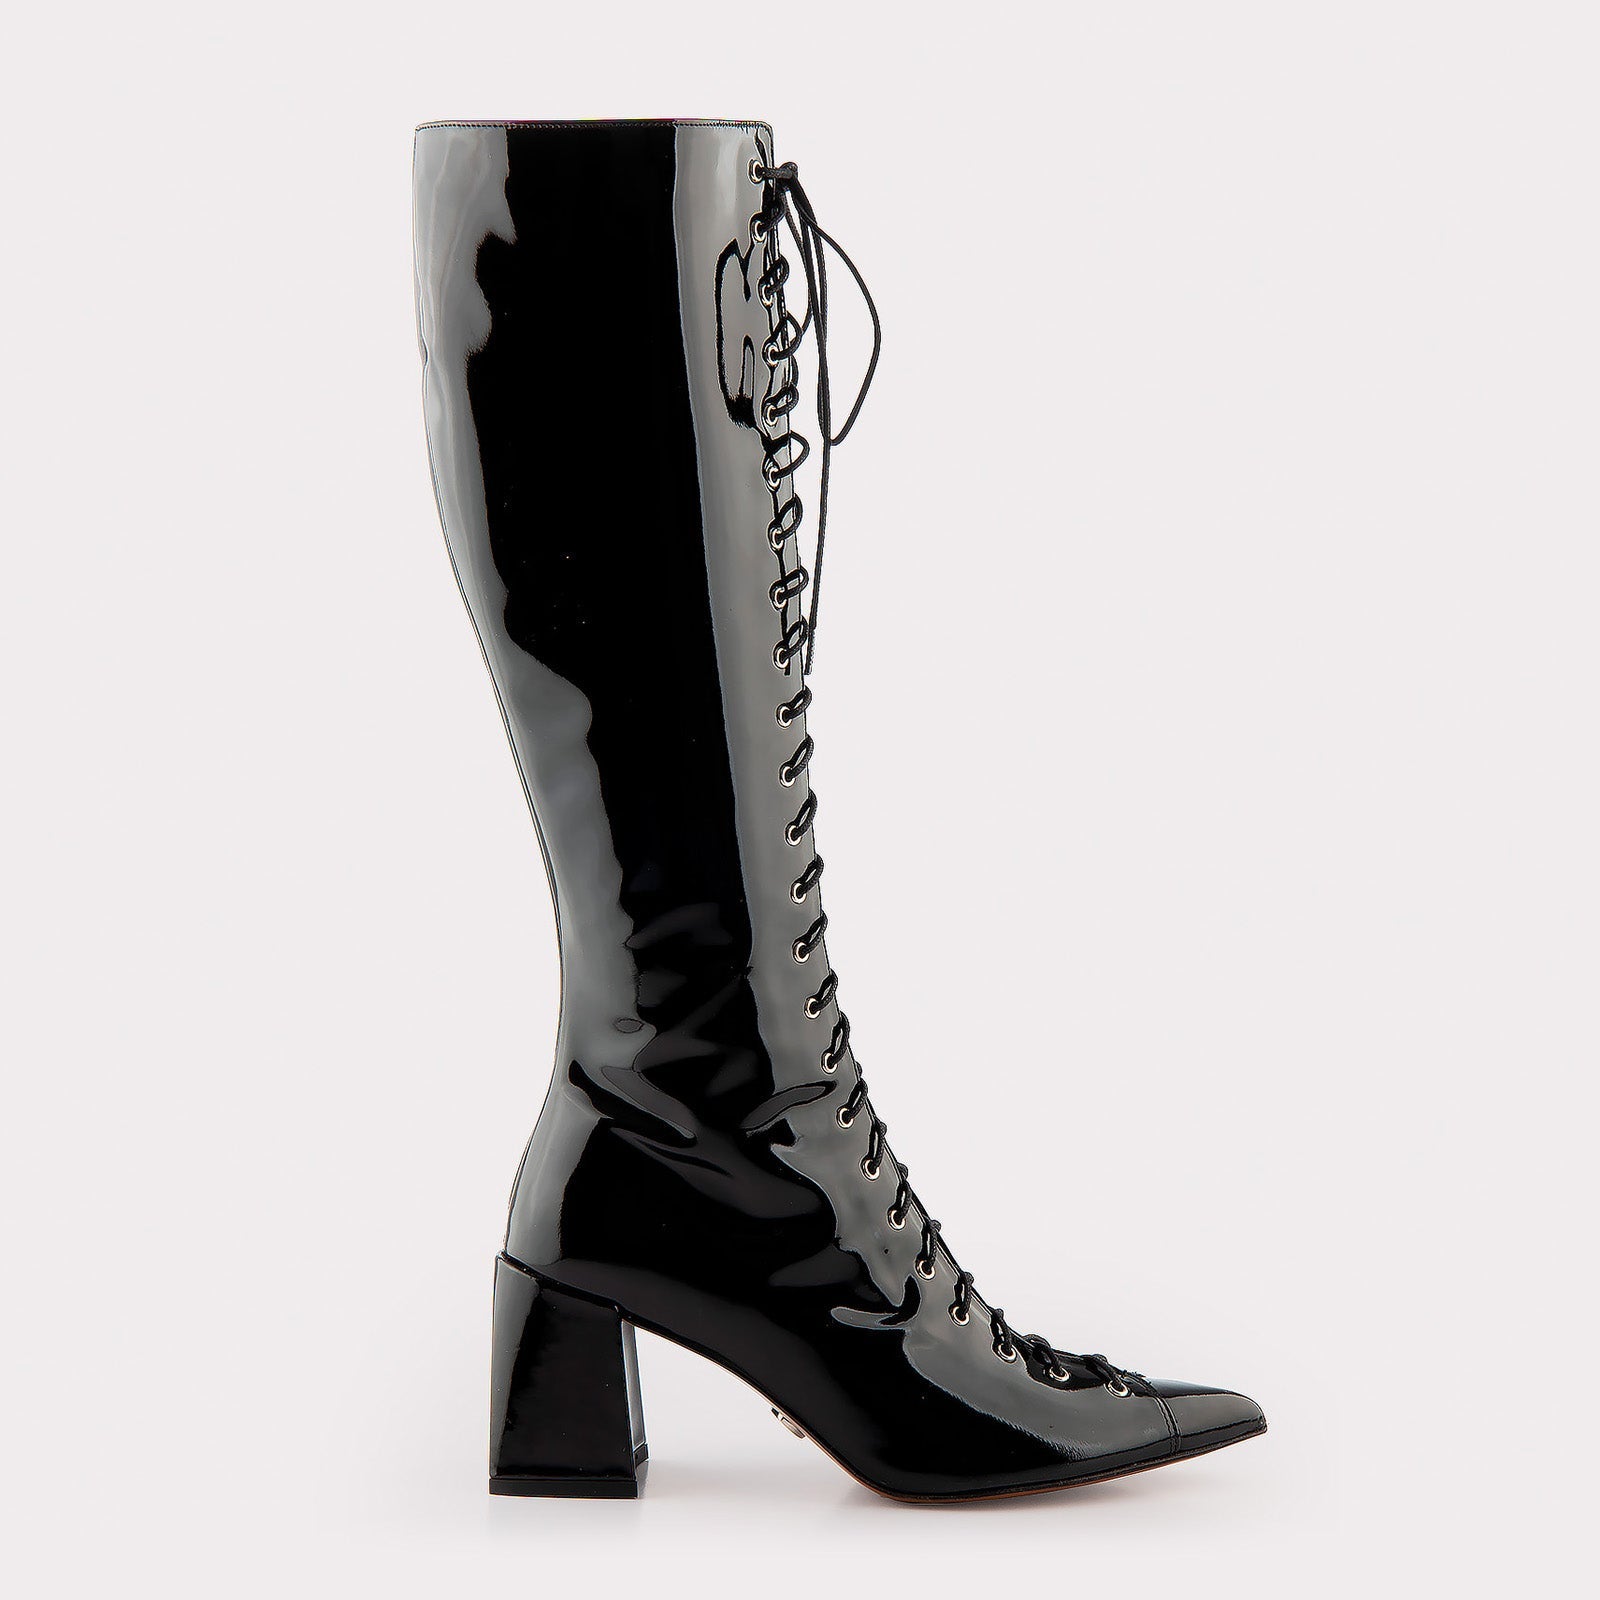 MONICA 03 BLACK PATENT LEATHER BOOTS